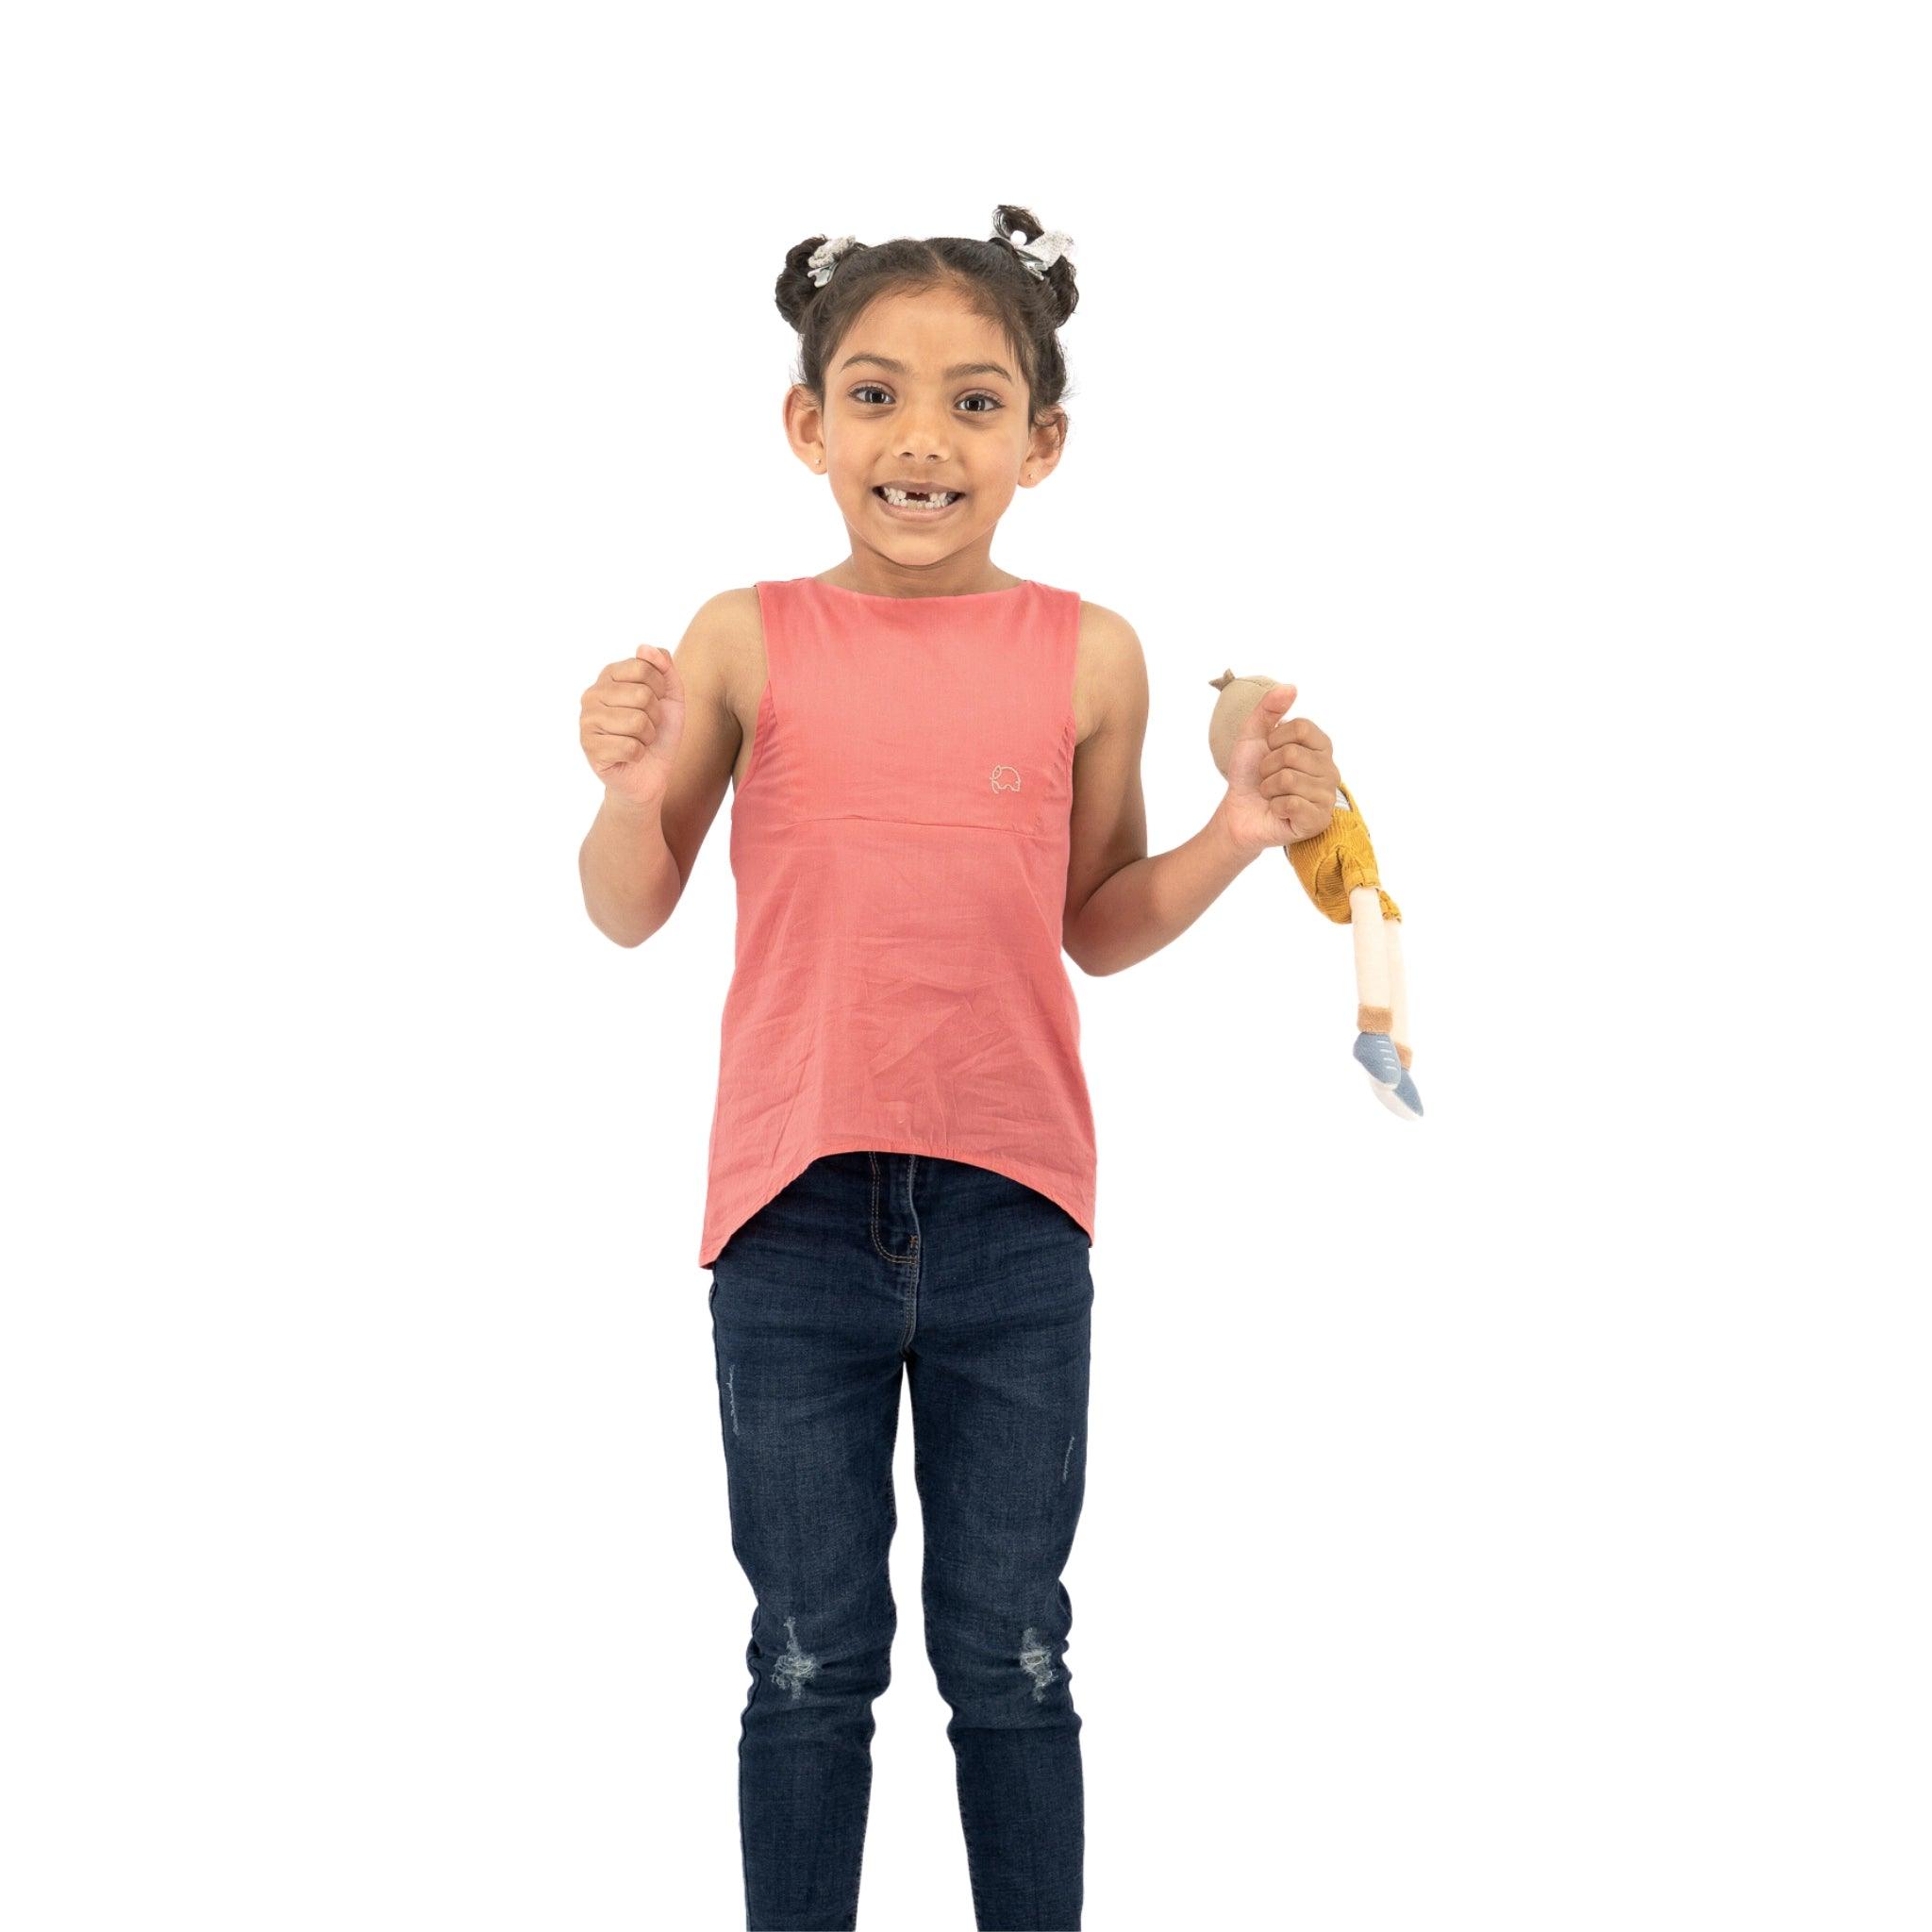 A young girl with a playful expression, wearing a Karee Tea Rose Cotton Bib Neck Top for kids, holds a banana with a toy parachute against a white background.